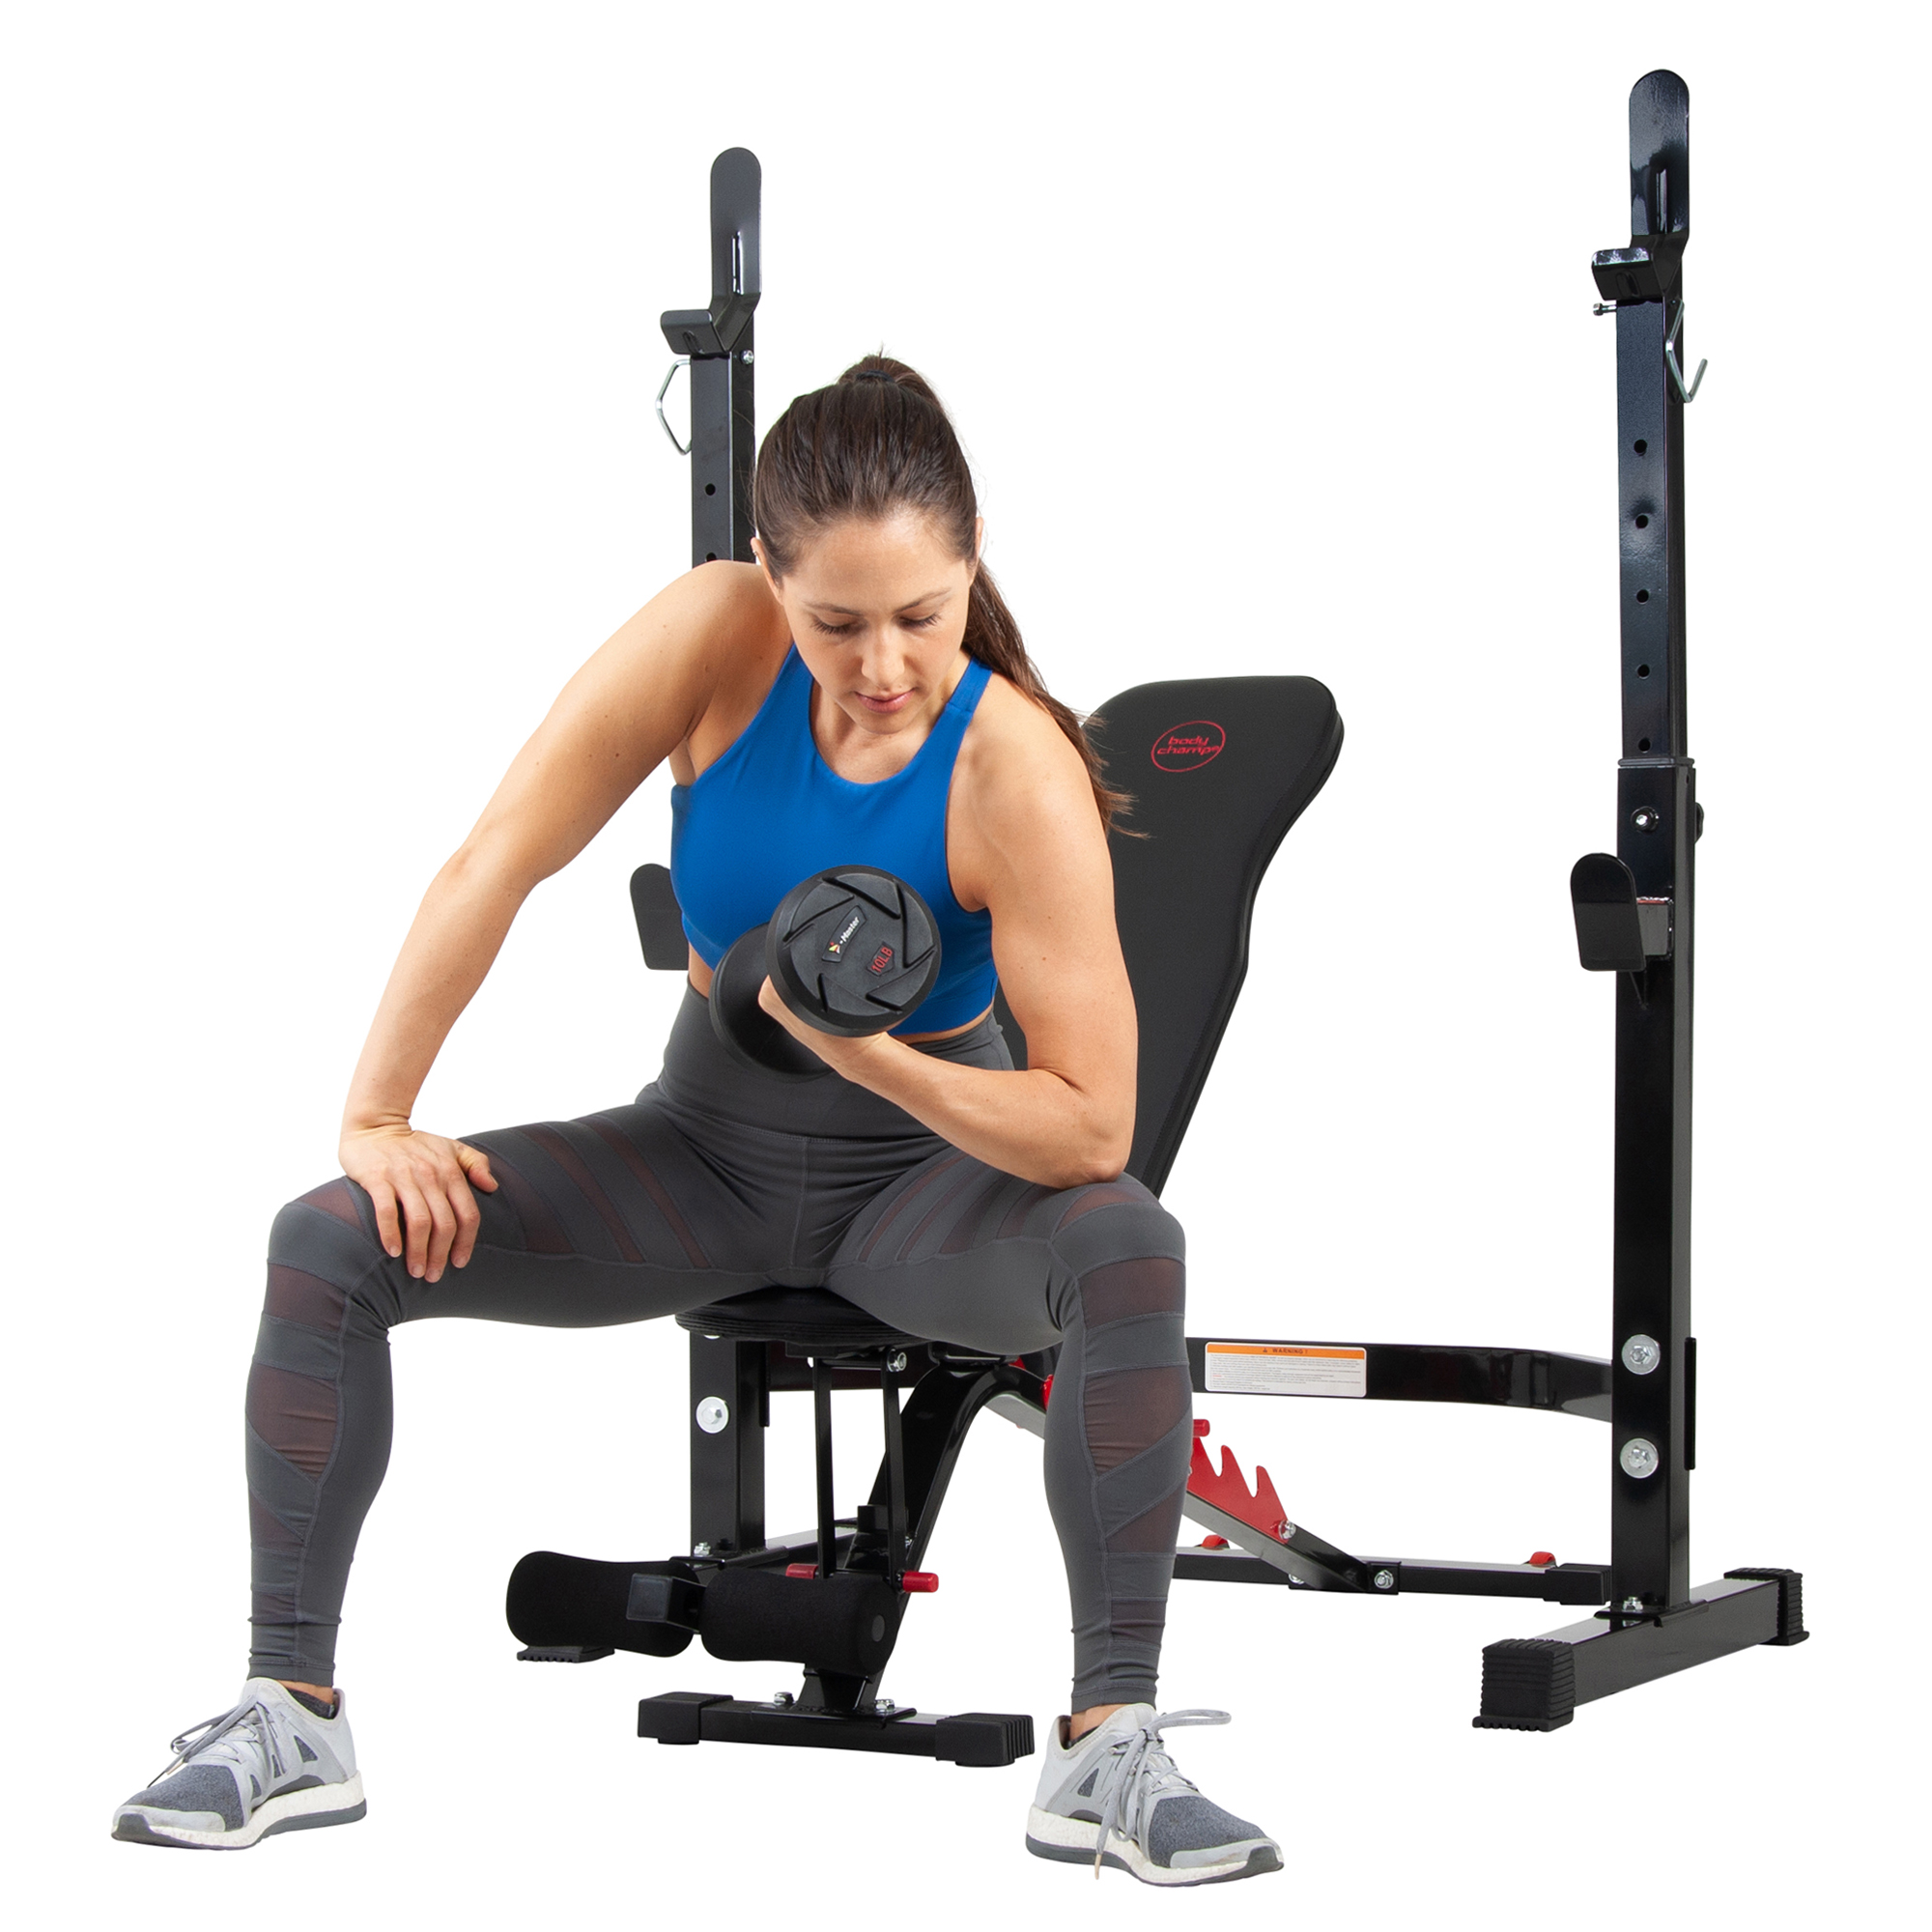 Body Champ BCB3578 Two-Piece Olympic Weight Bench with Adjustable Rack Combo, Max. Weight 300 lbs. - image 4 of 10